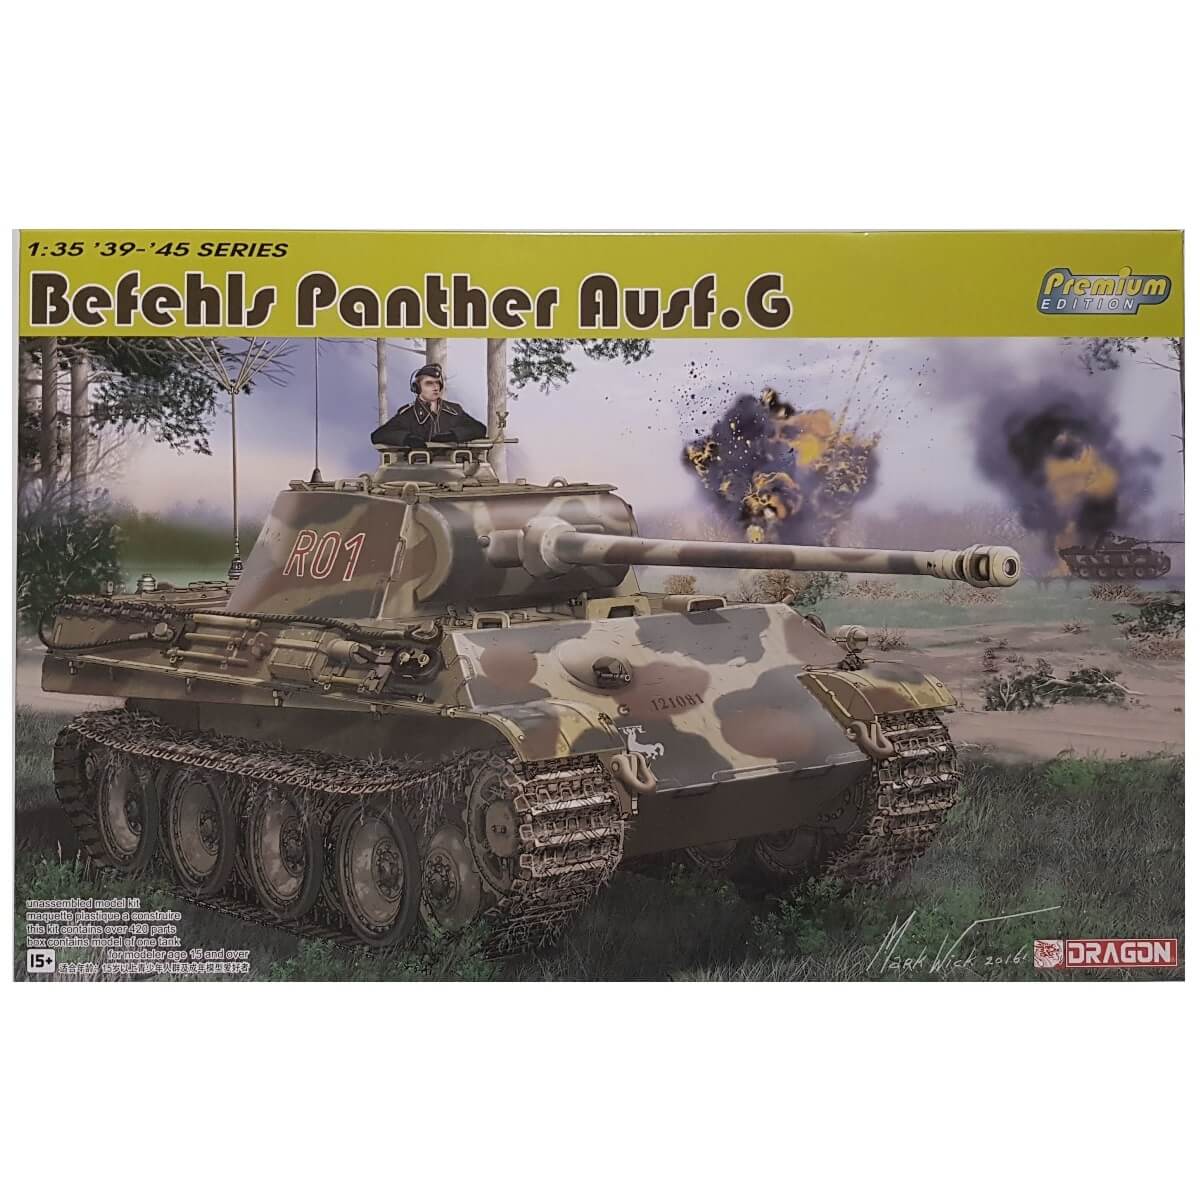 1:35 Befehls Panther Ausf. G - DRAGON